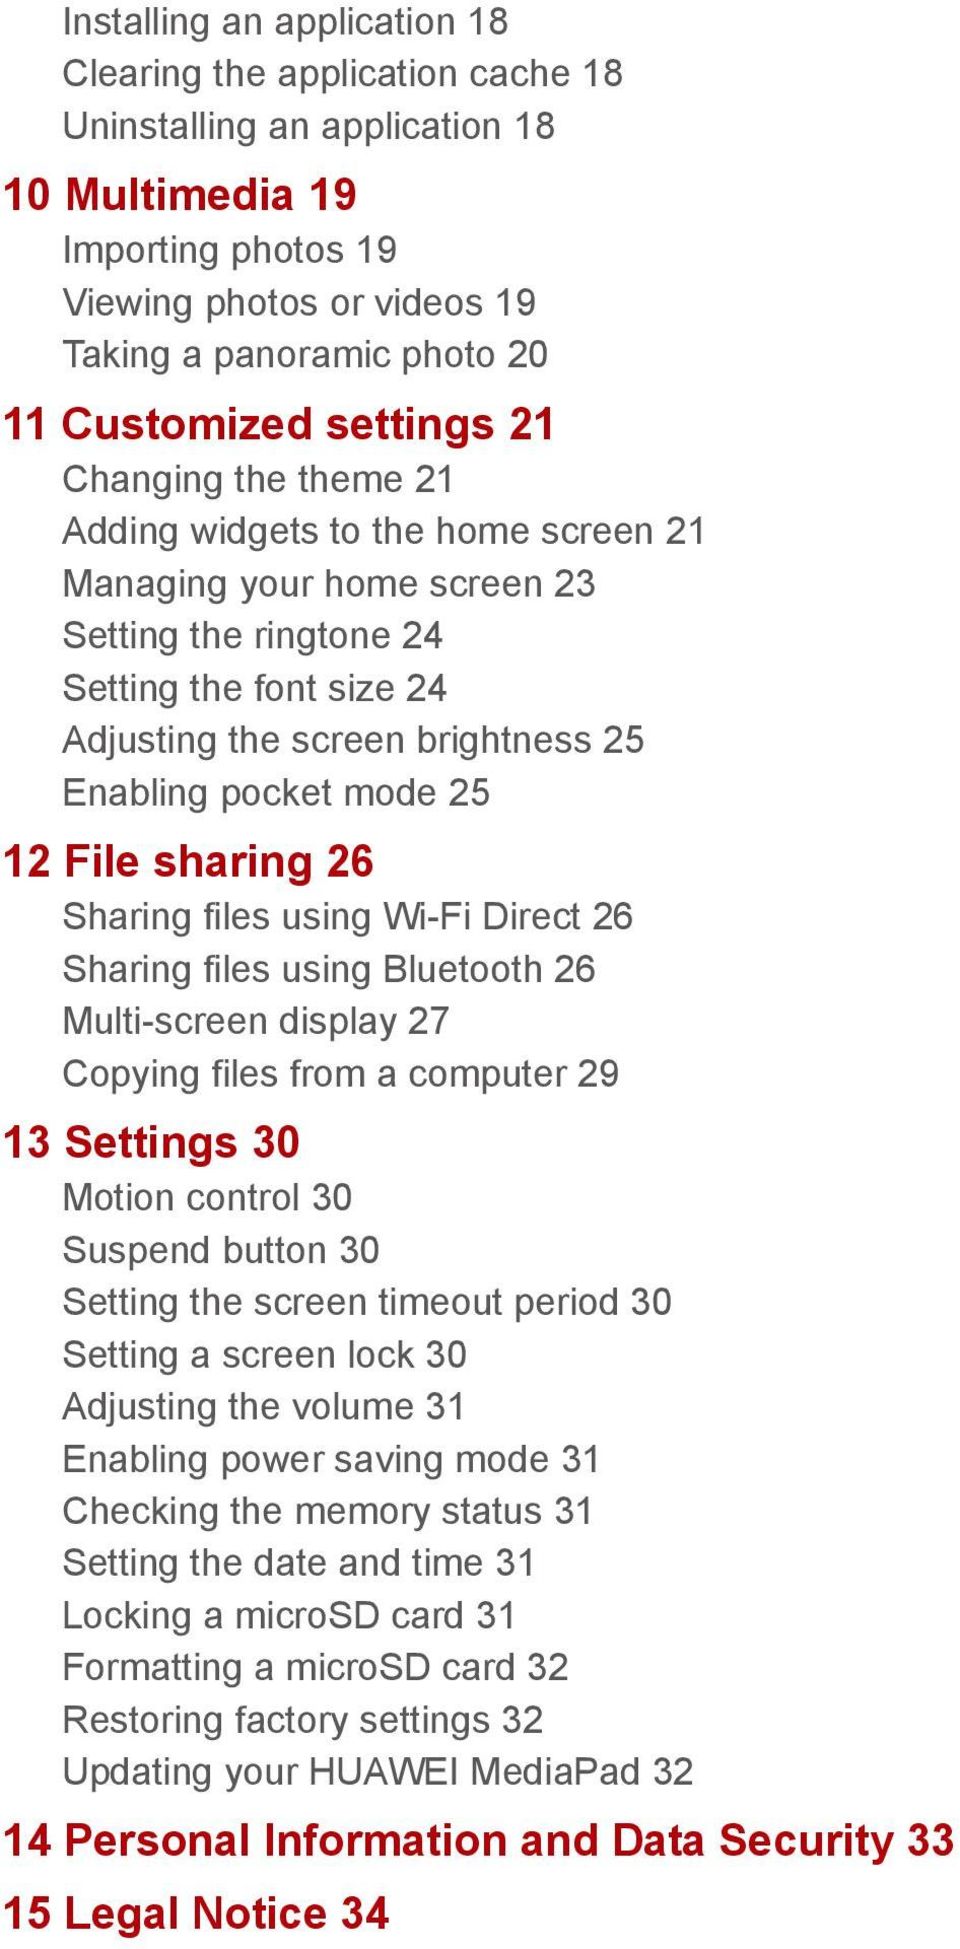 Enabling pocket mode 25 12 File sharing 26 Sharing files using Wi-Fi Direct 26 Sharing files using Bluetooth 26 Multi-screen display 27 Copying files from a computer 29 13 Settings 30 Motion control